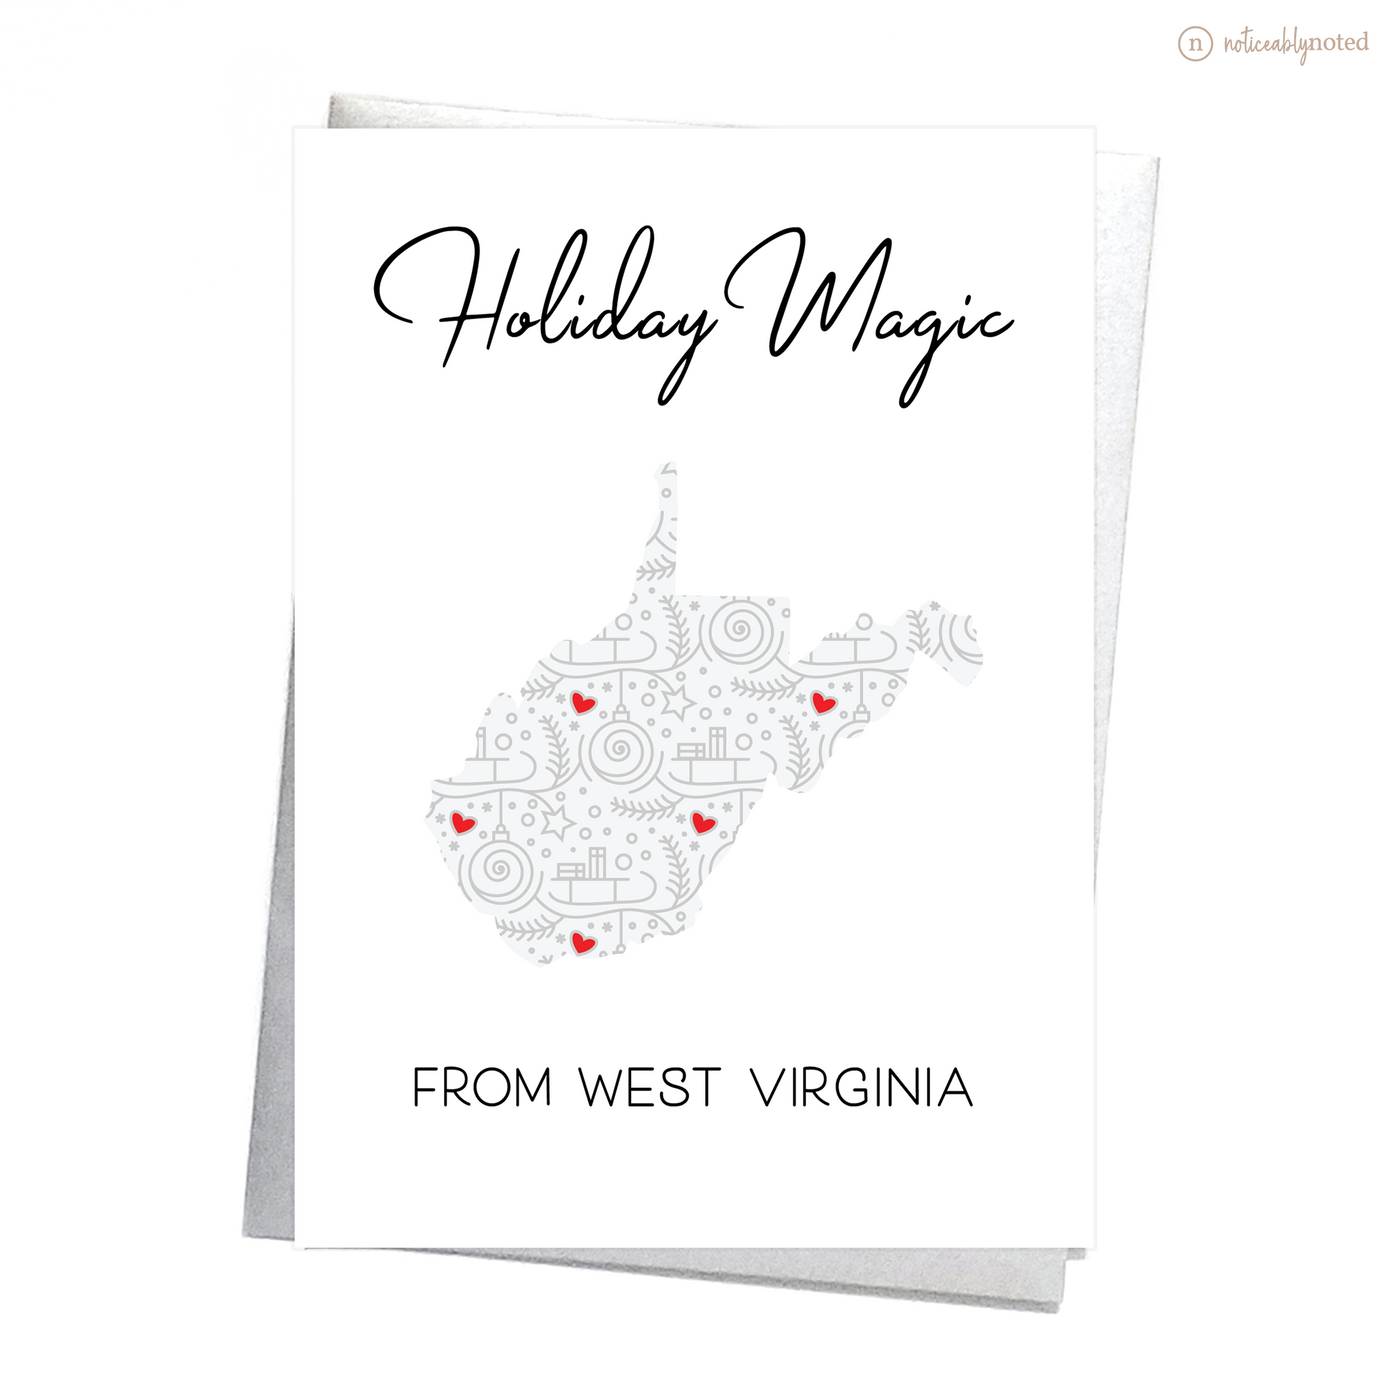 West Virginia Christmas Card - Holiday Magic | Noticeably Noted